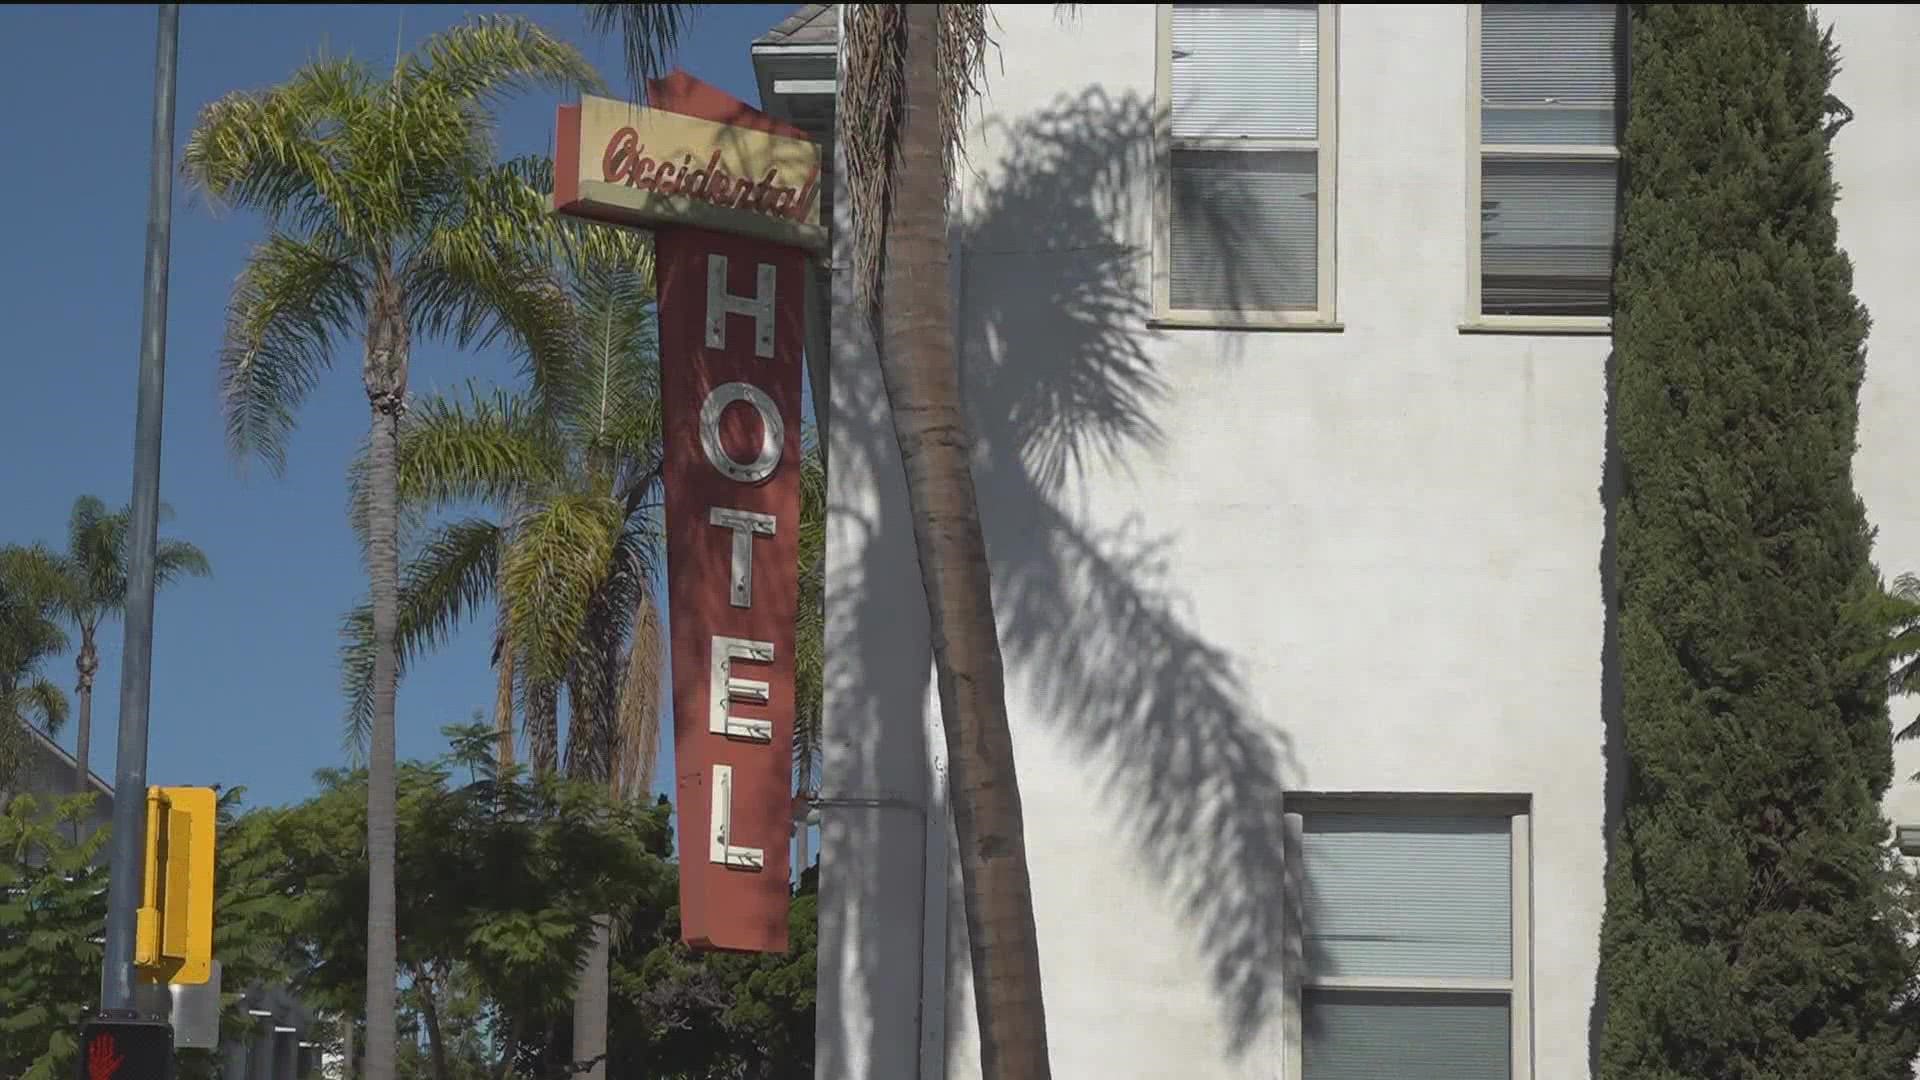 Dozens of once-homeless tenants at the Occidental Hotel face eviction if they don't honor the rent increase.